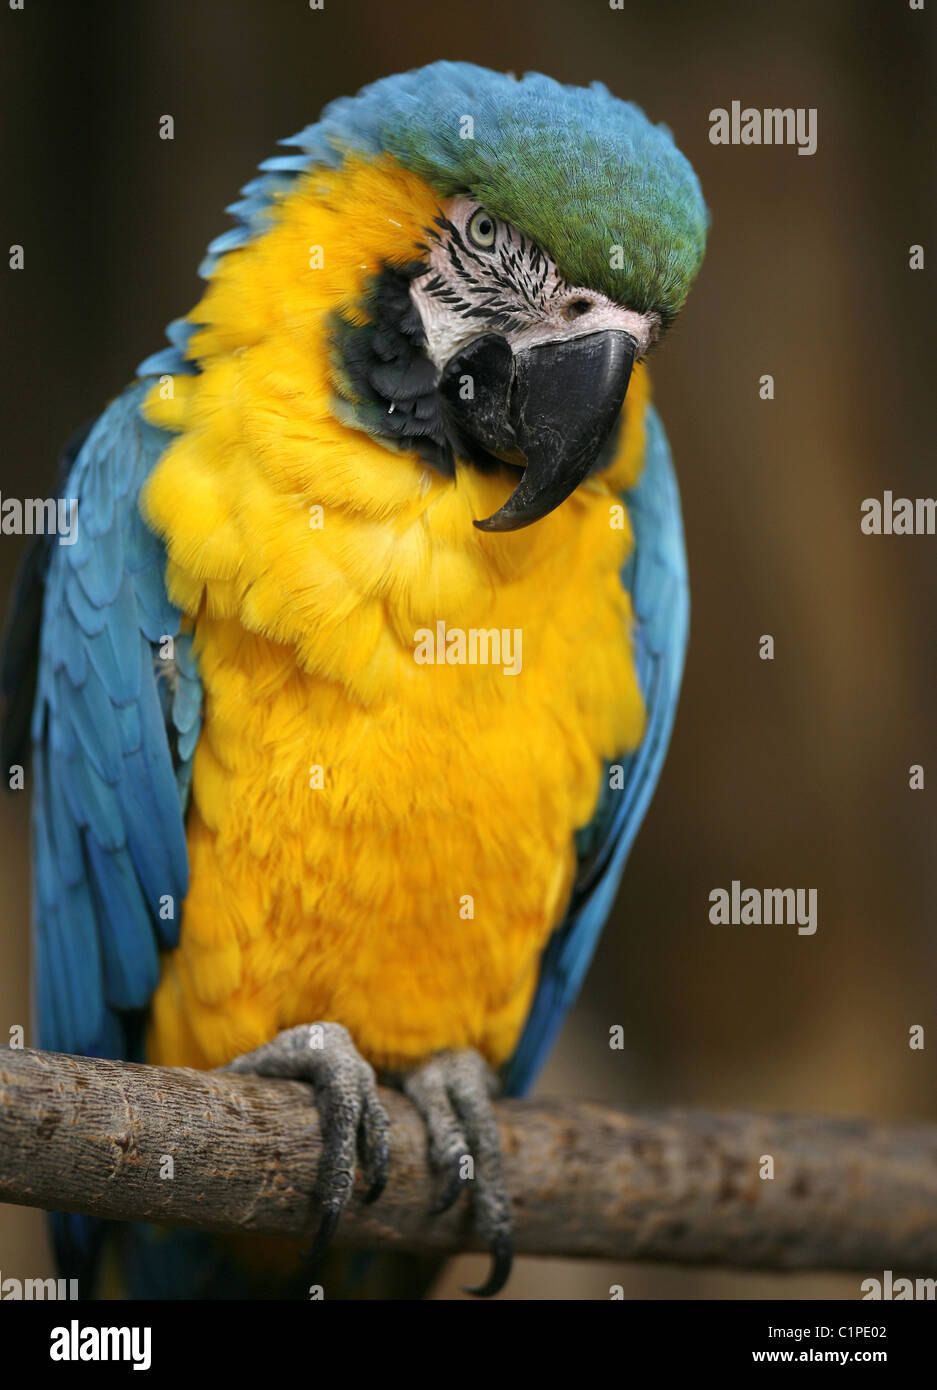 Yellow and blue parrot sitting on a branch looking down. Taken at Paradise Wildlife Park, England. Stock Photo